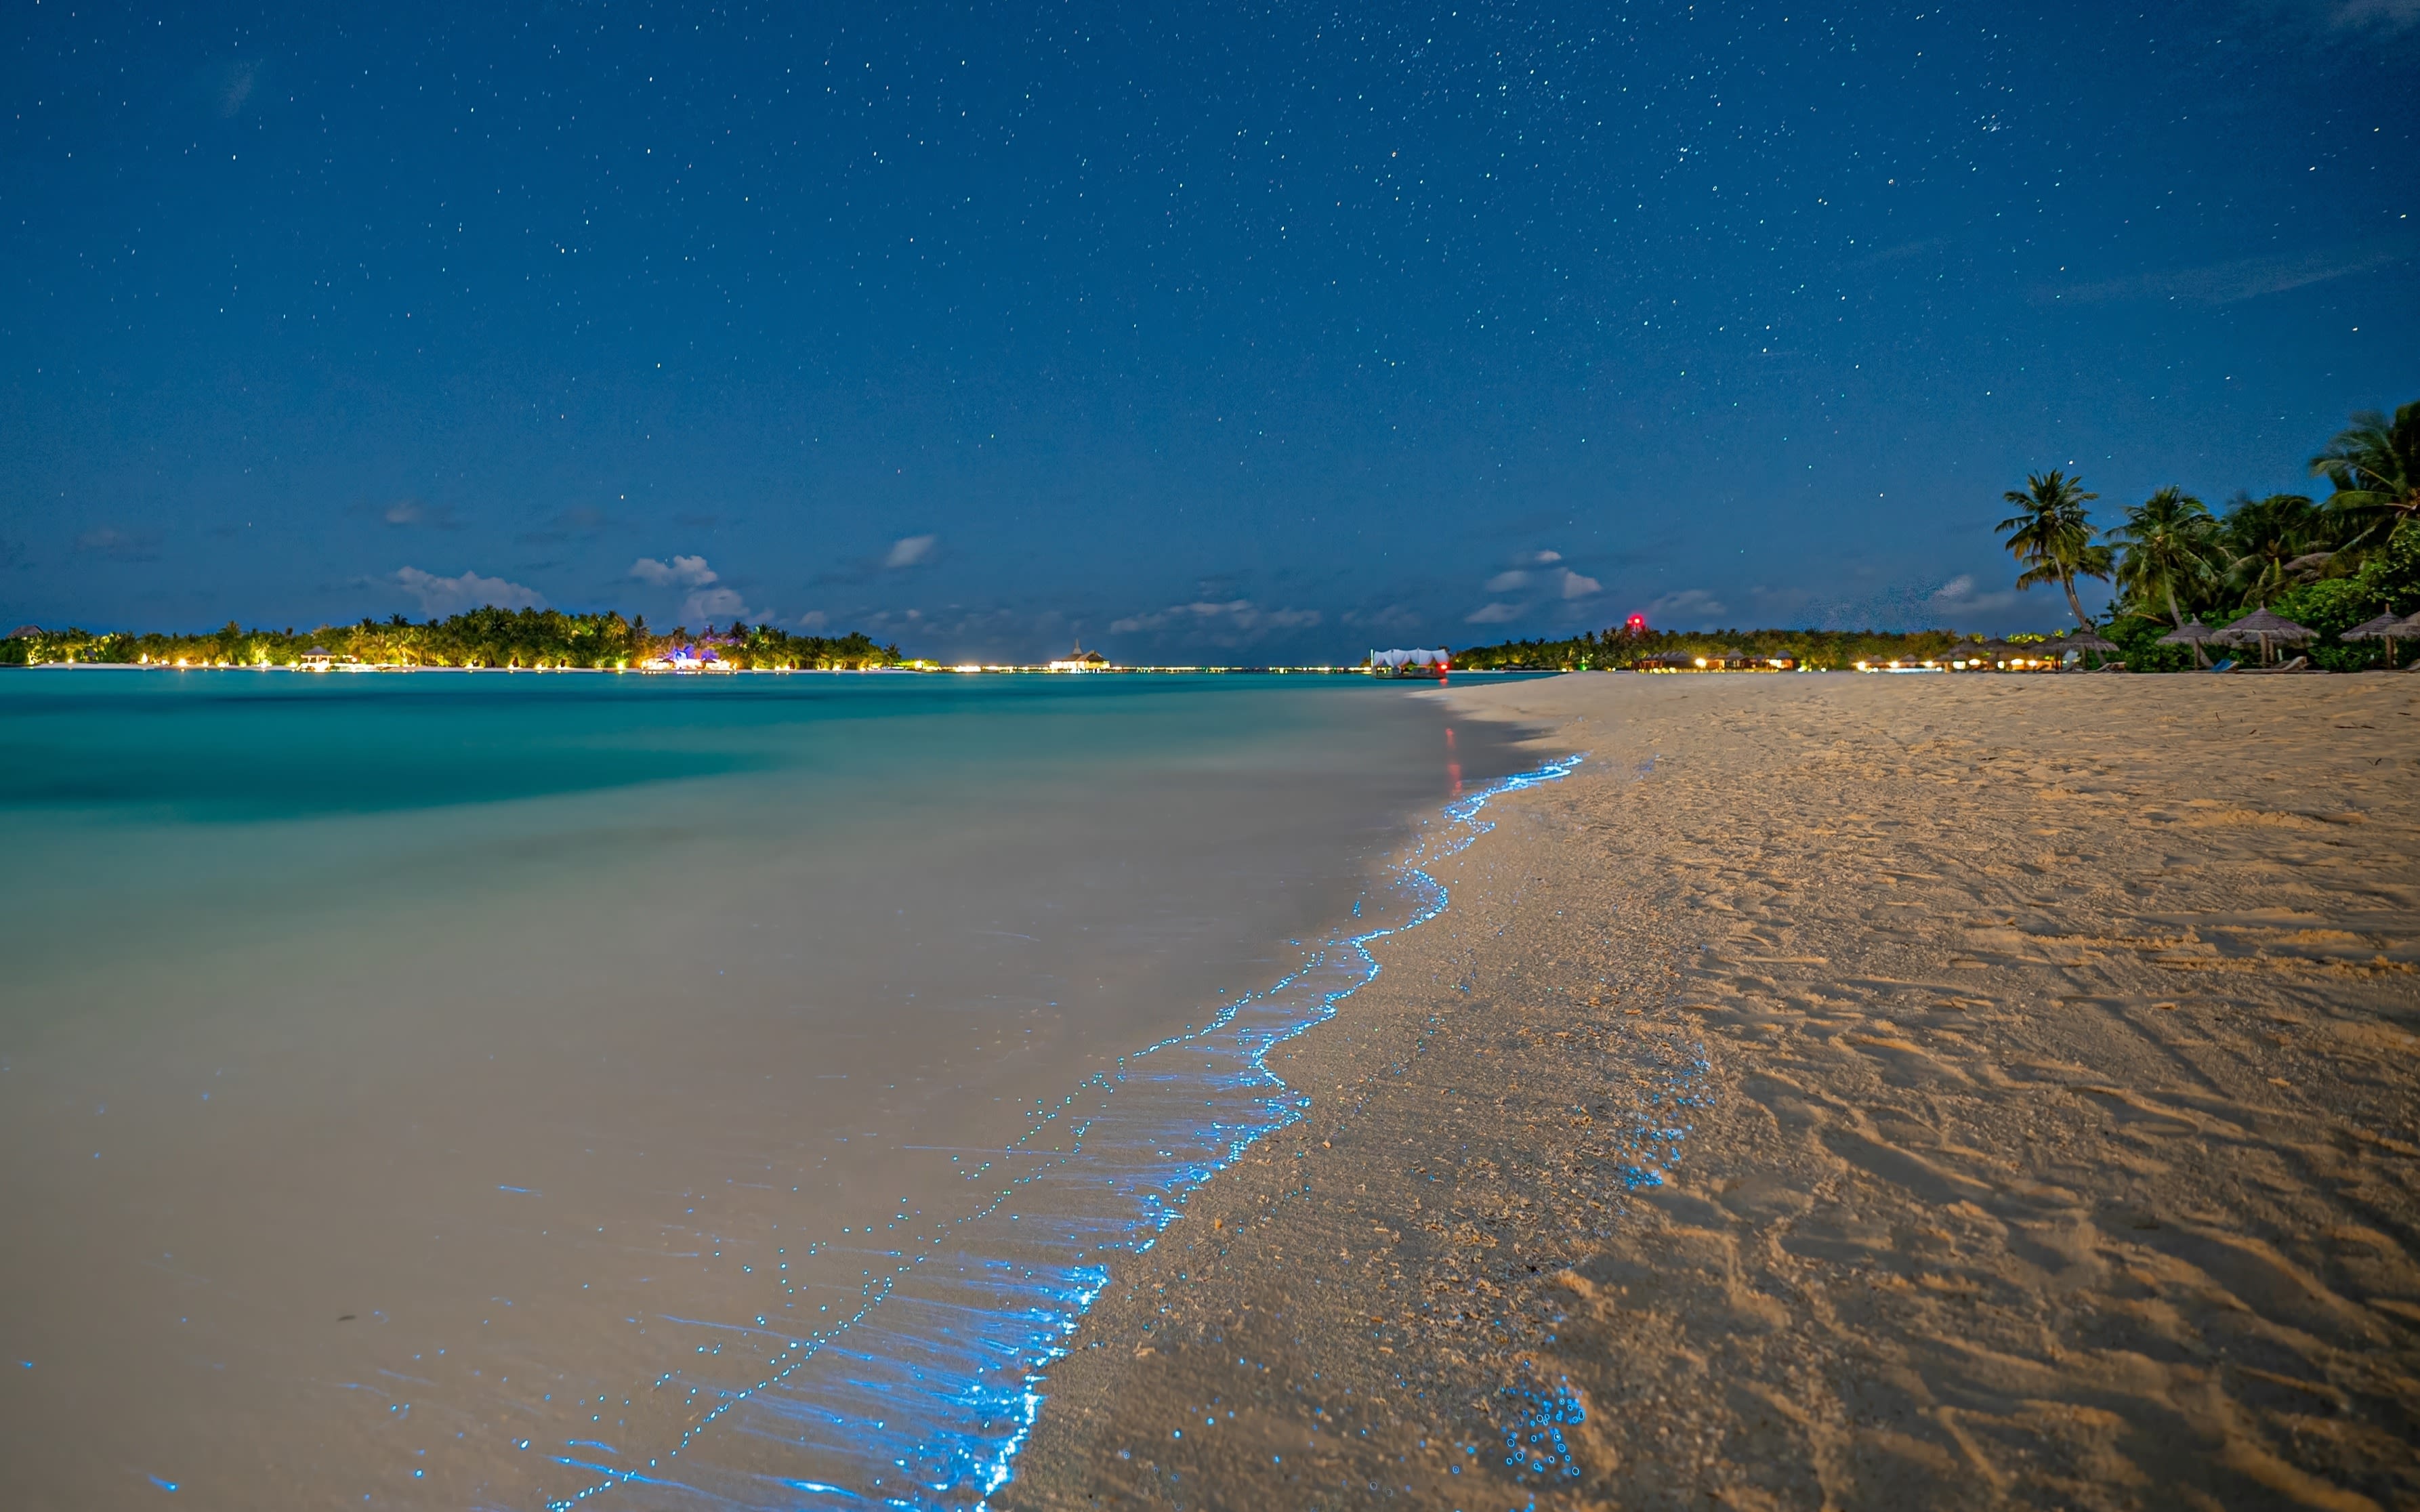 An image of a glowing beach in the Maldives